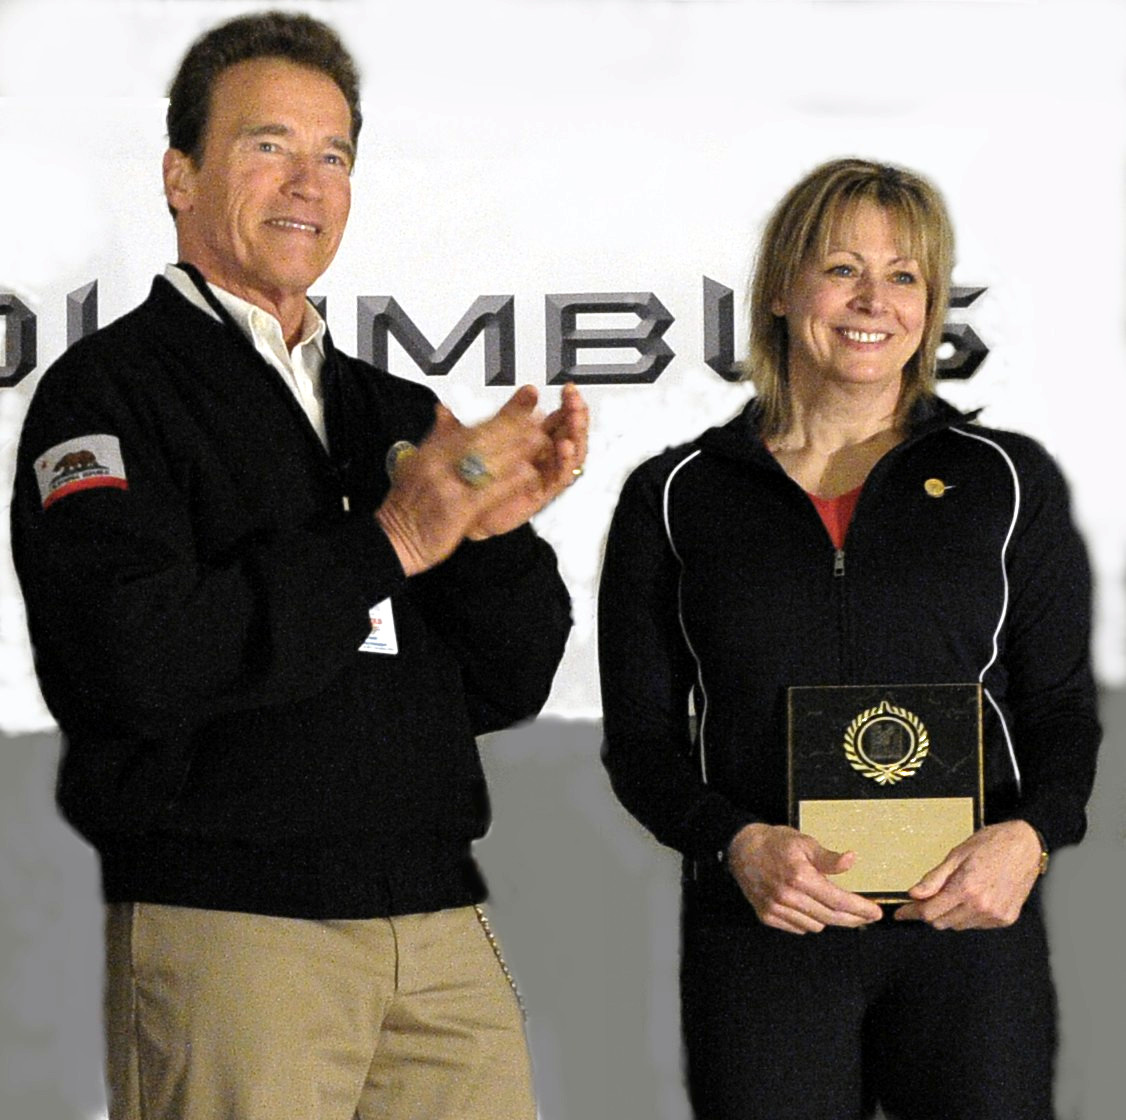 Schwarzenegger, pictured with 1987 world champion American Karyn Marshall, presenting awards at the USA Weightlifting Hall of Fame in 2011 in Columbus, OhioSchwarzenegger, pictured with 1987 world champion American Karyn Marshall, presenting awards at the USA Weightlifting Hall of Fame in 2011 in Columbus, Ohio